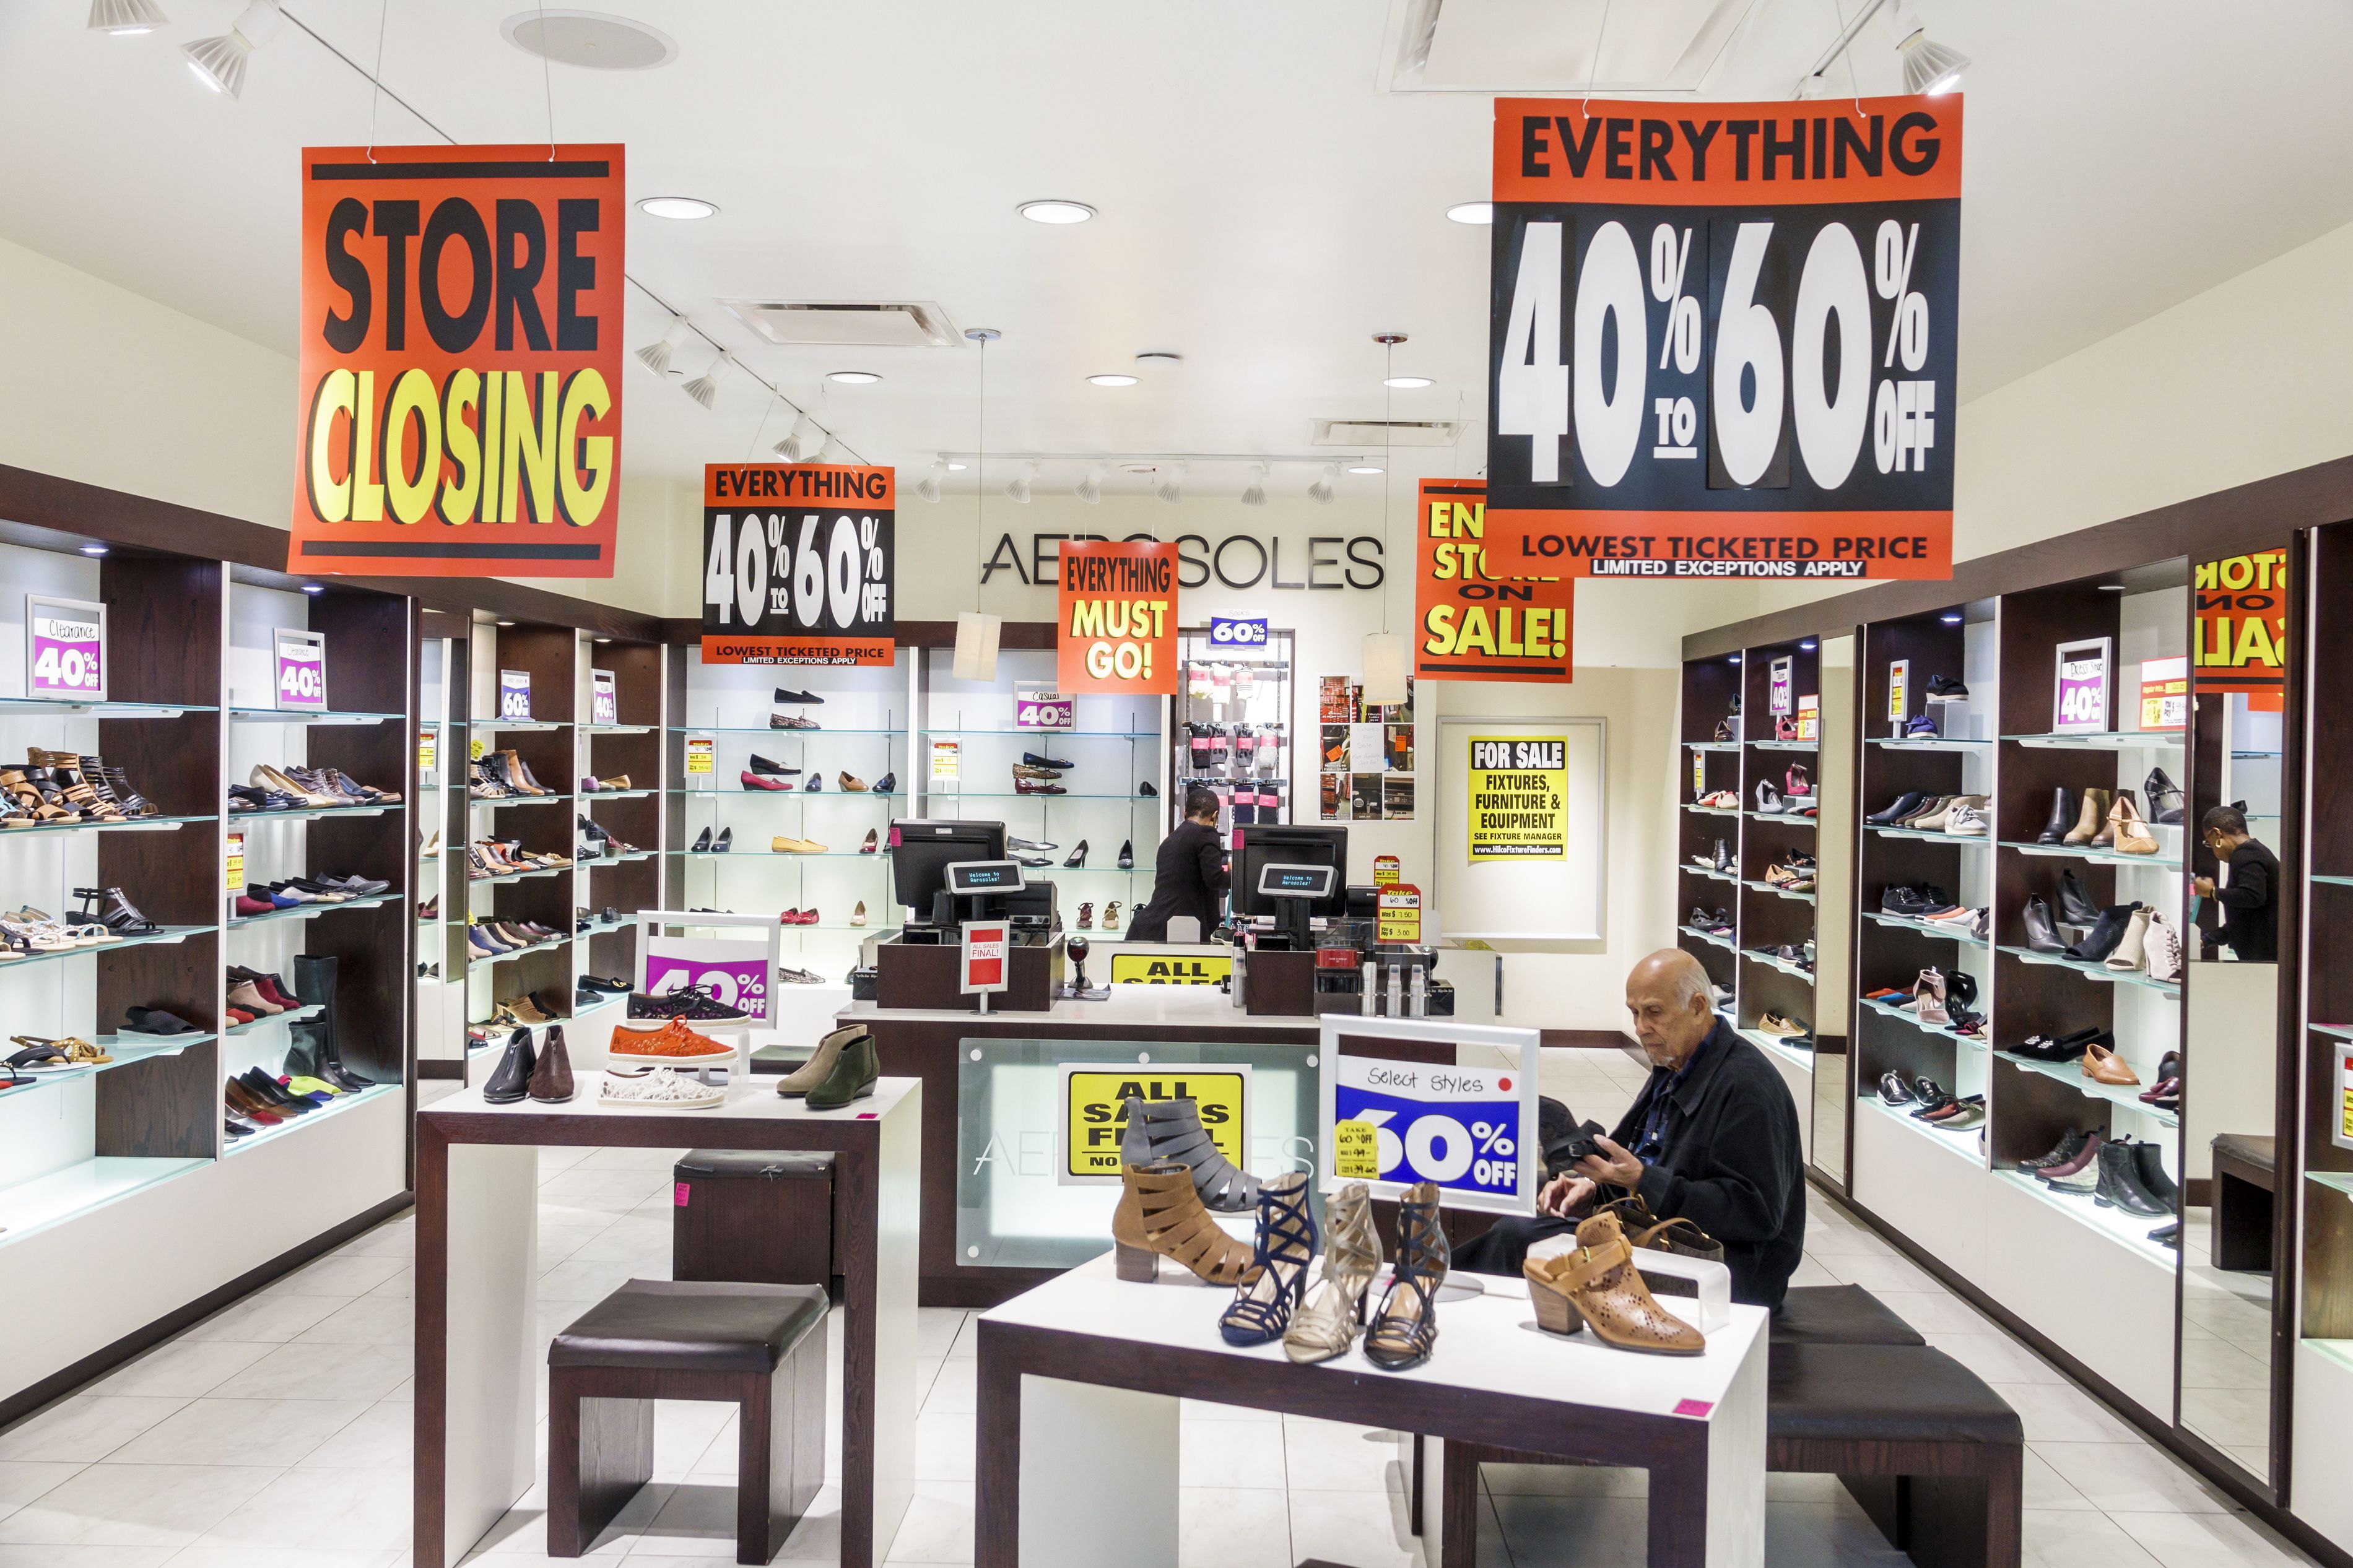 Retail Stores Could Close in 2020